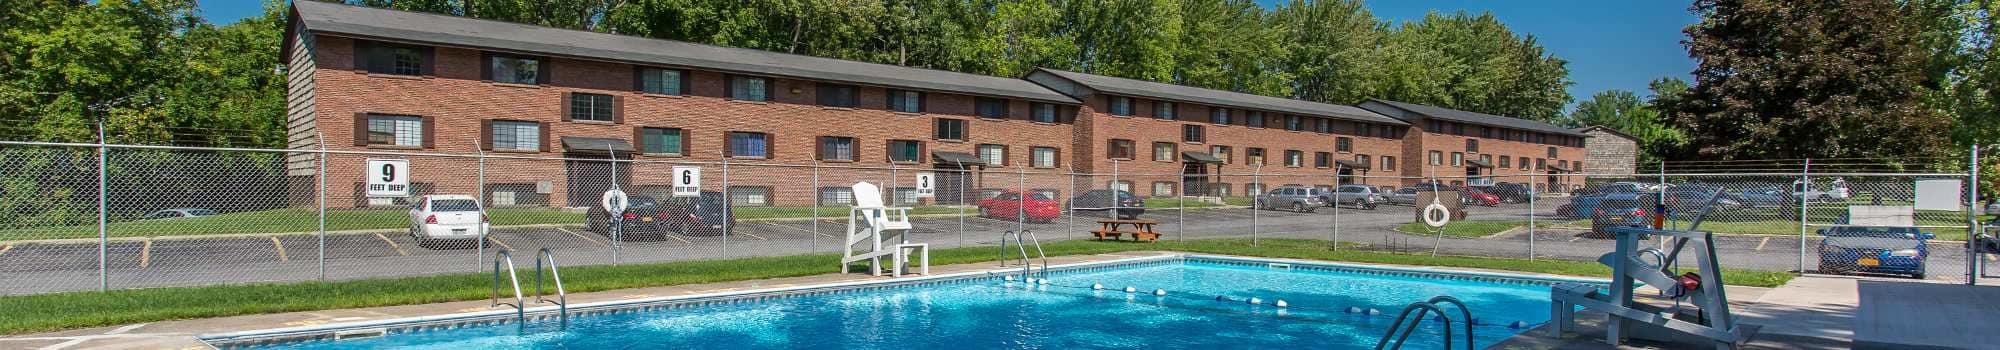 Amenities at The Residences at Covered Bridge in Liverpool, New York